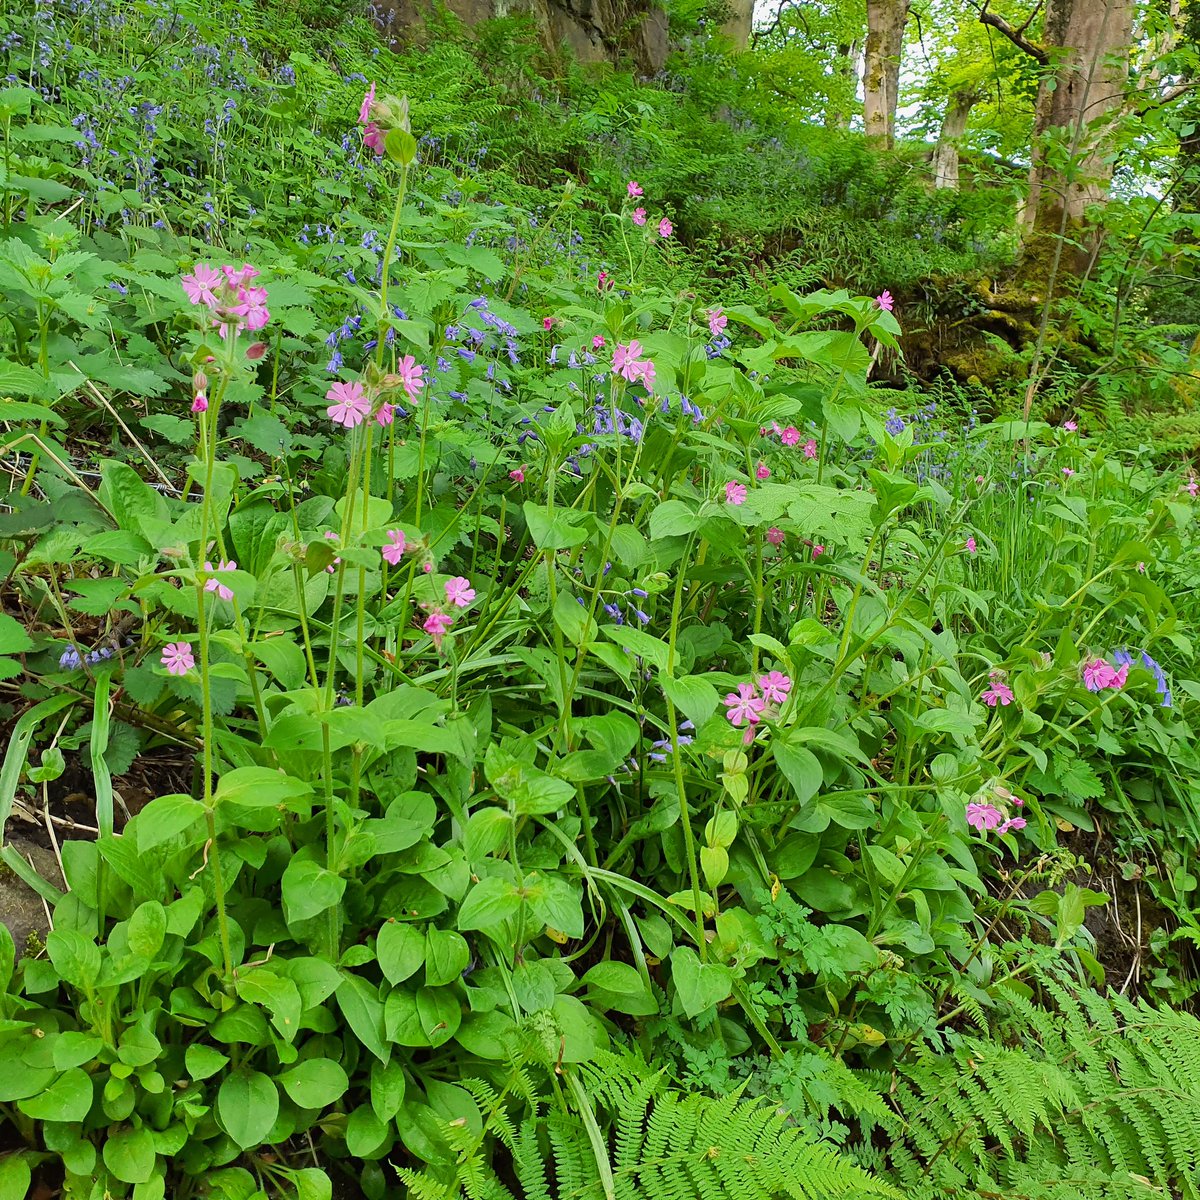 What was a dense patch of #HimalayanBalsam back in 2018 is now a diverse mix of Bluebells, Red Campion, and Buttercups following several years of treatment, hand pulling the Balsam between June and July before it went to seed. Nothing else was done for these wildflowers to thrive